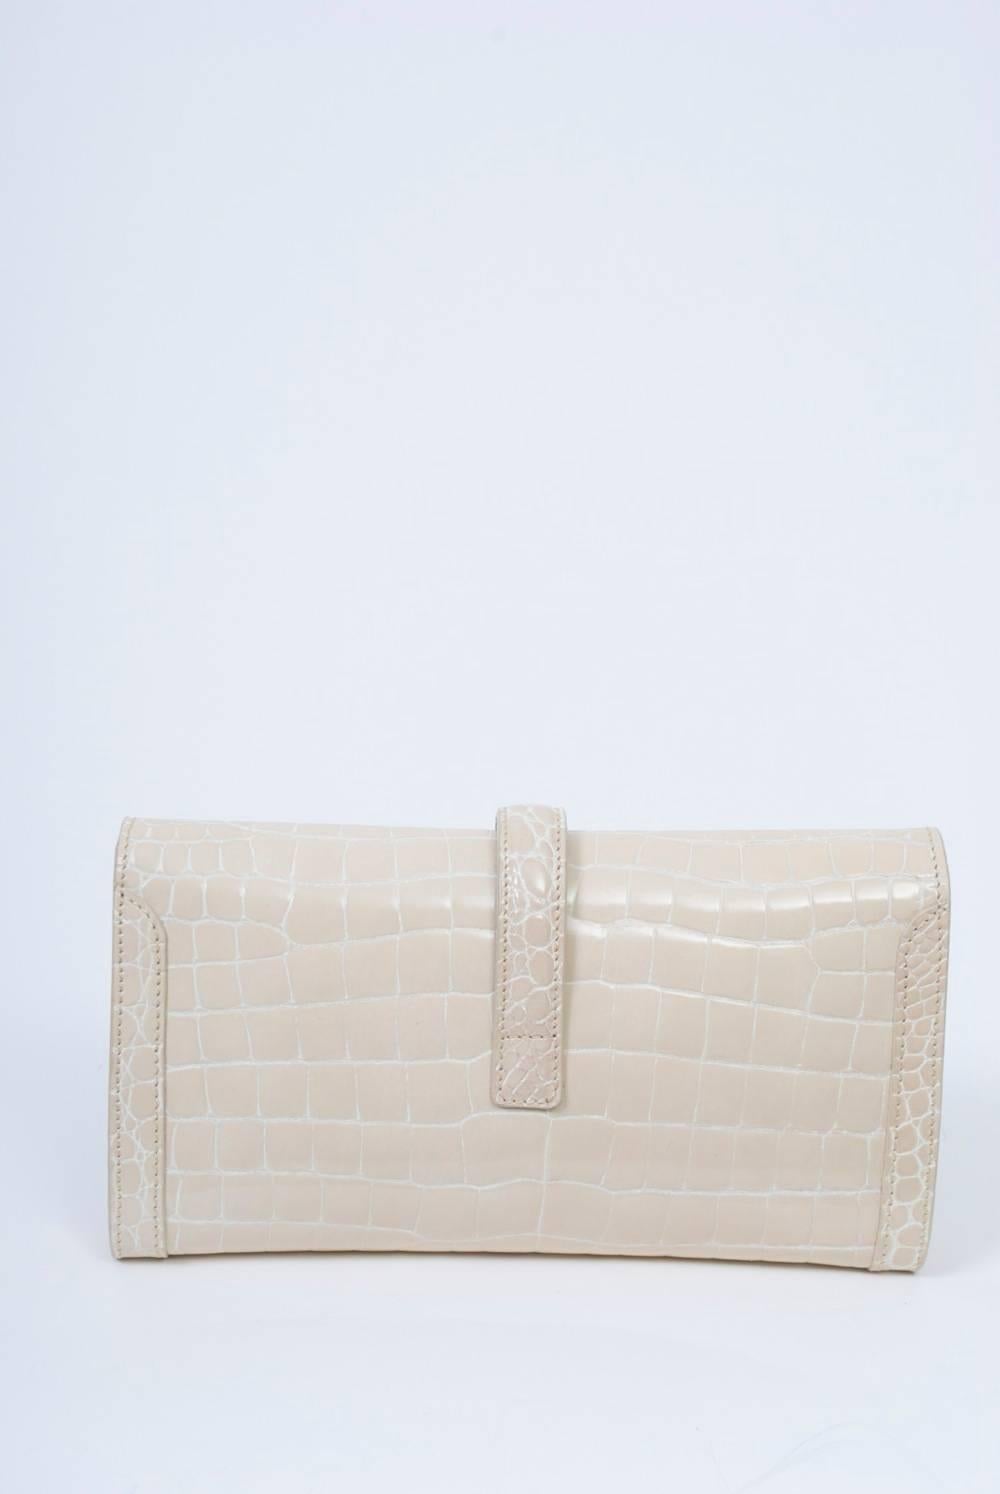 Ivory faux alligator clutch with 